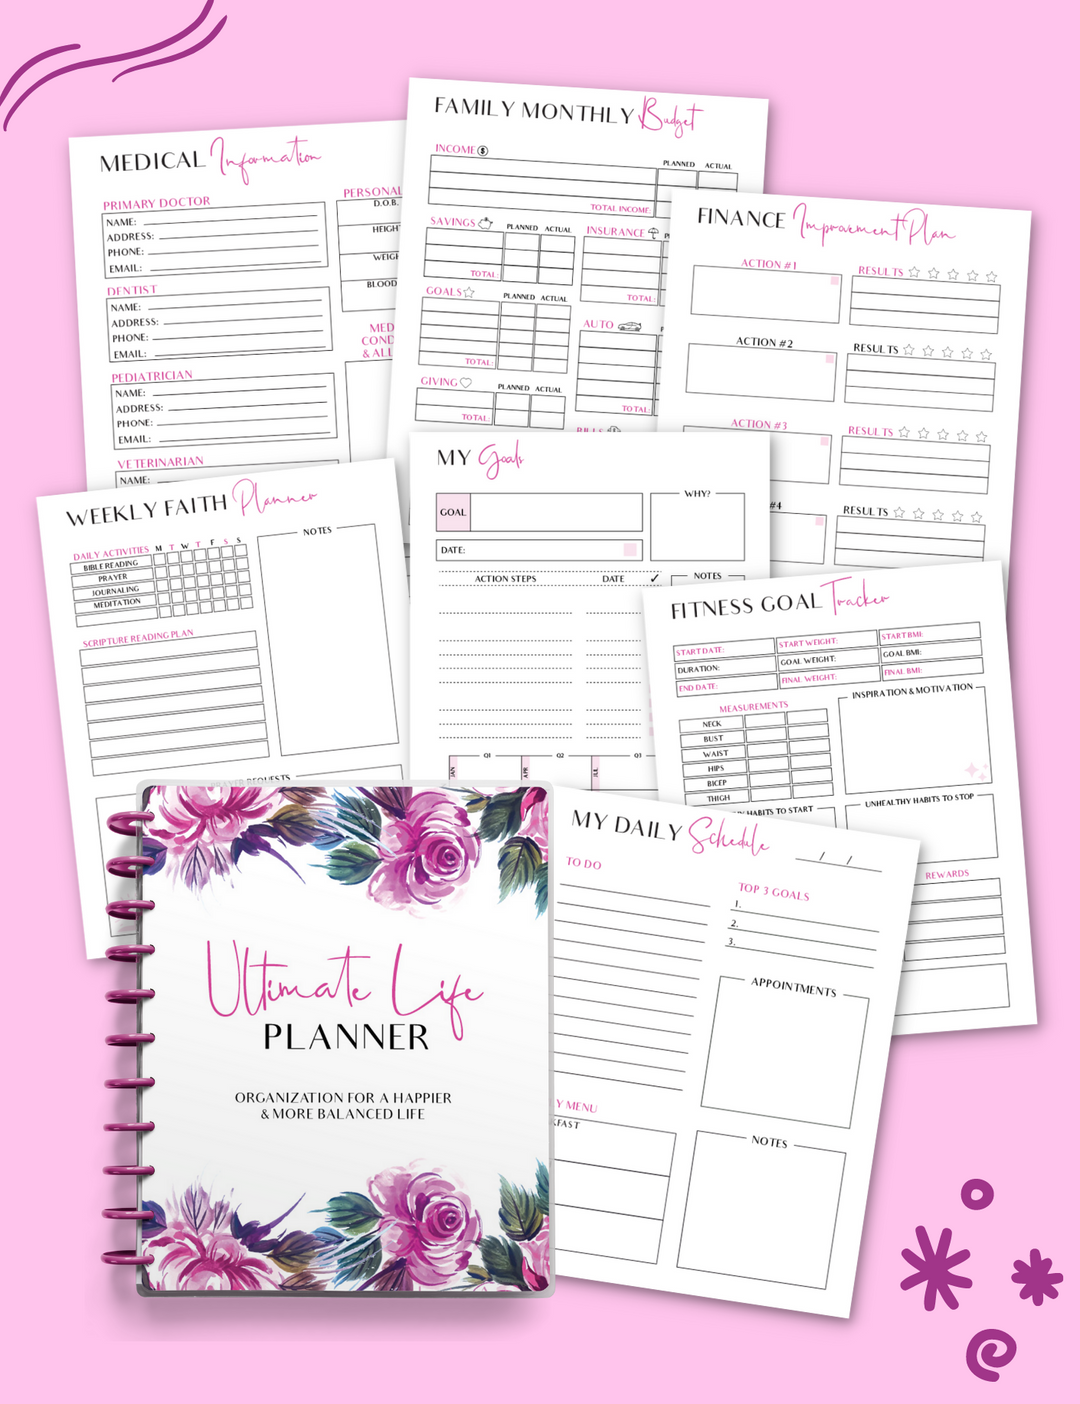 The Ultimate Life Planner